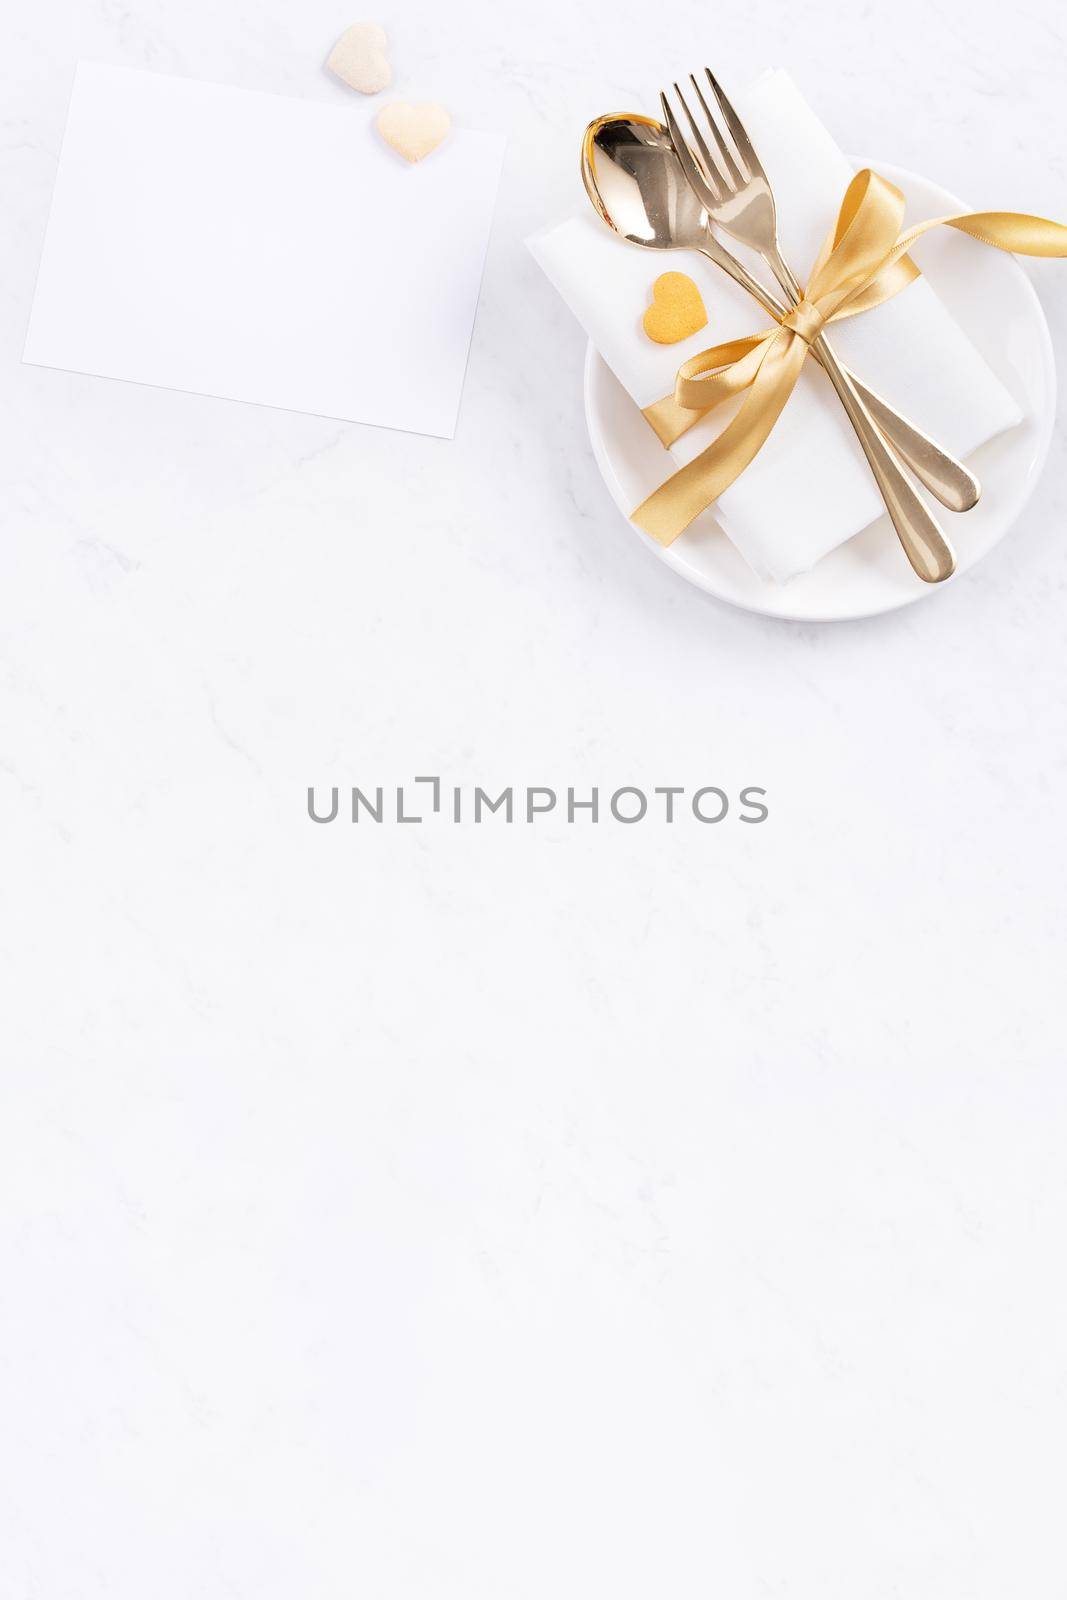 Valentine's Day, Mother's Day, holiday dating meal, banquet design concept - White plate and golden ribbon on marble background, top view, flat lay.